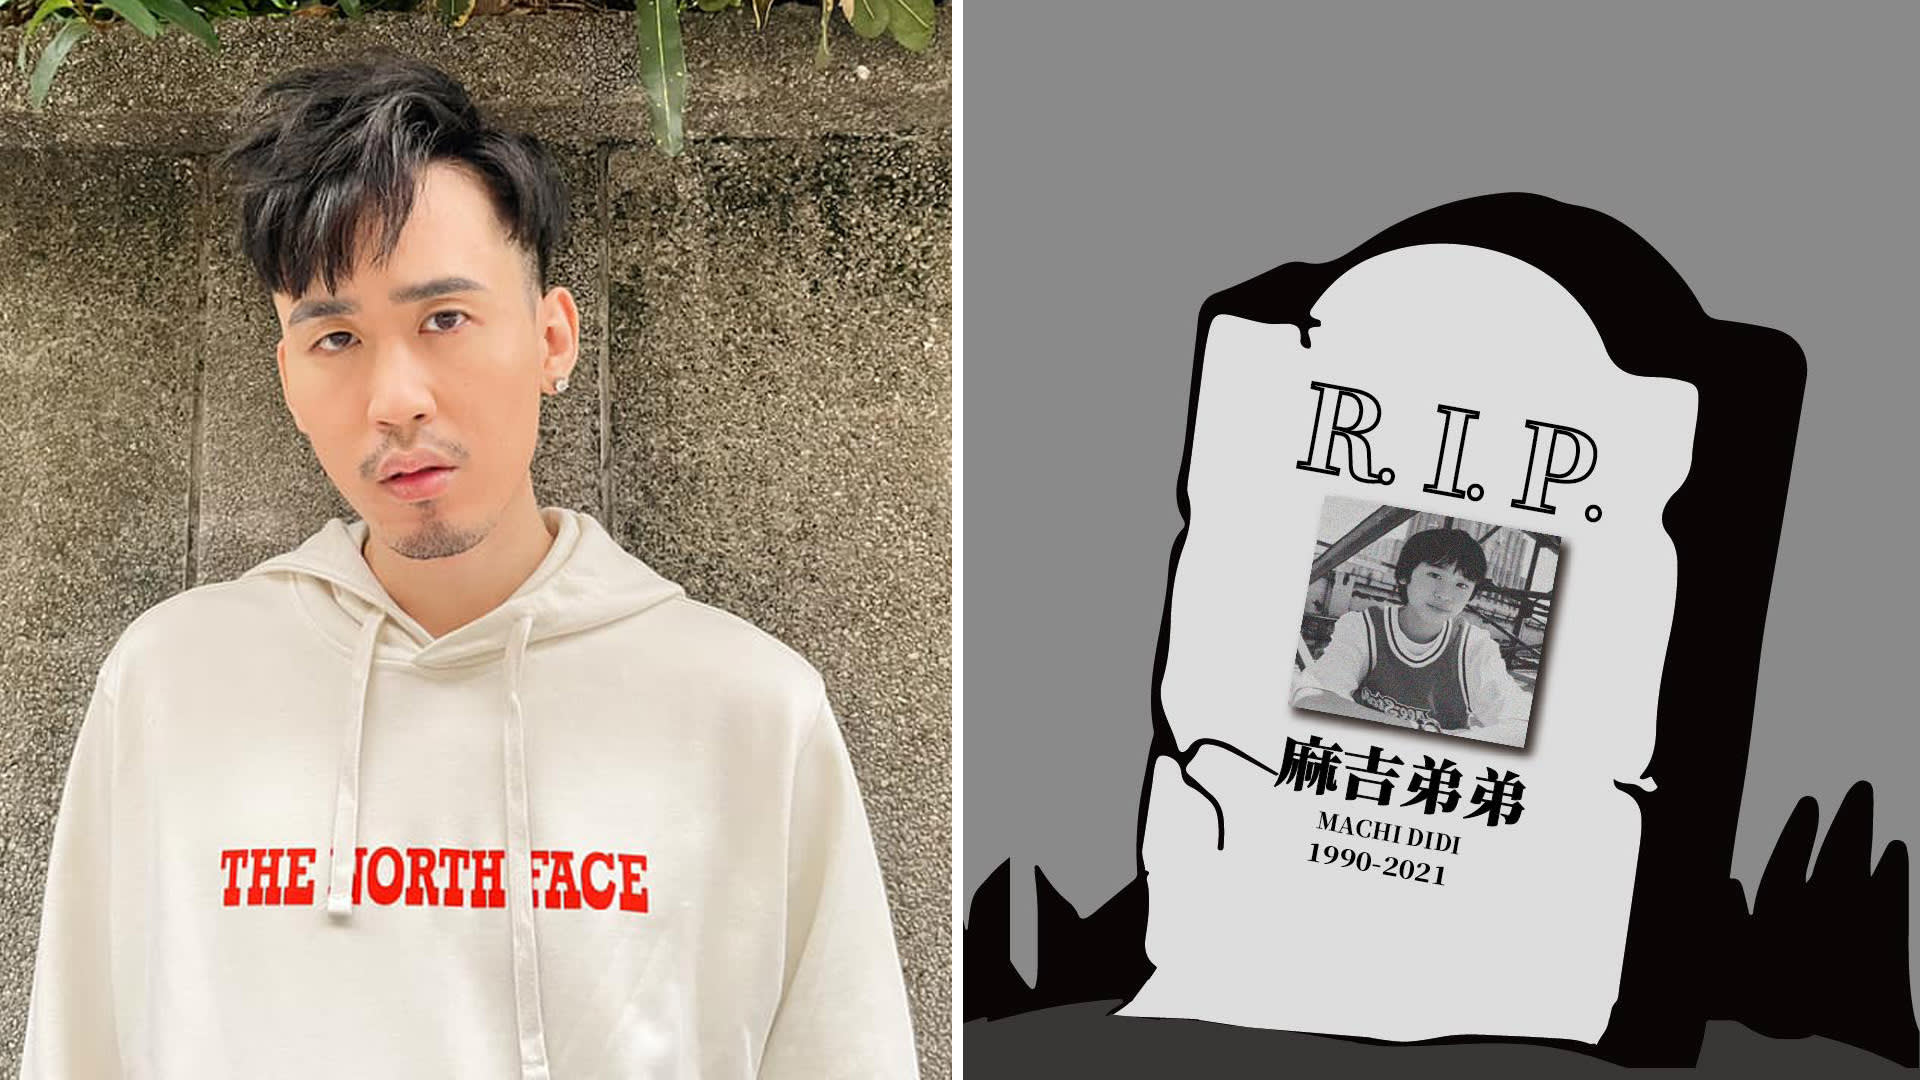 Netizens Thought Machi Didi Andrew Chou Had Died When A RIP Post Was Shared On His Social Media; Turns Out It Was A Plug For His New Song